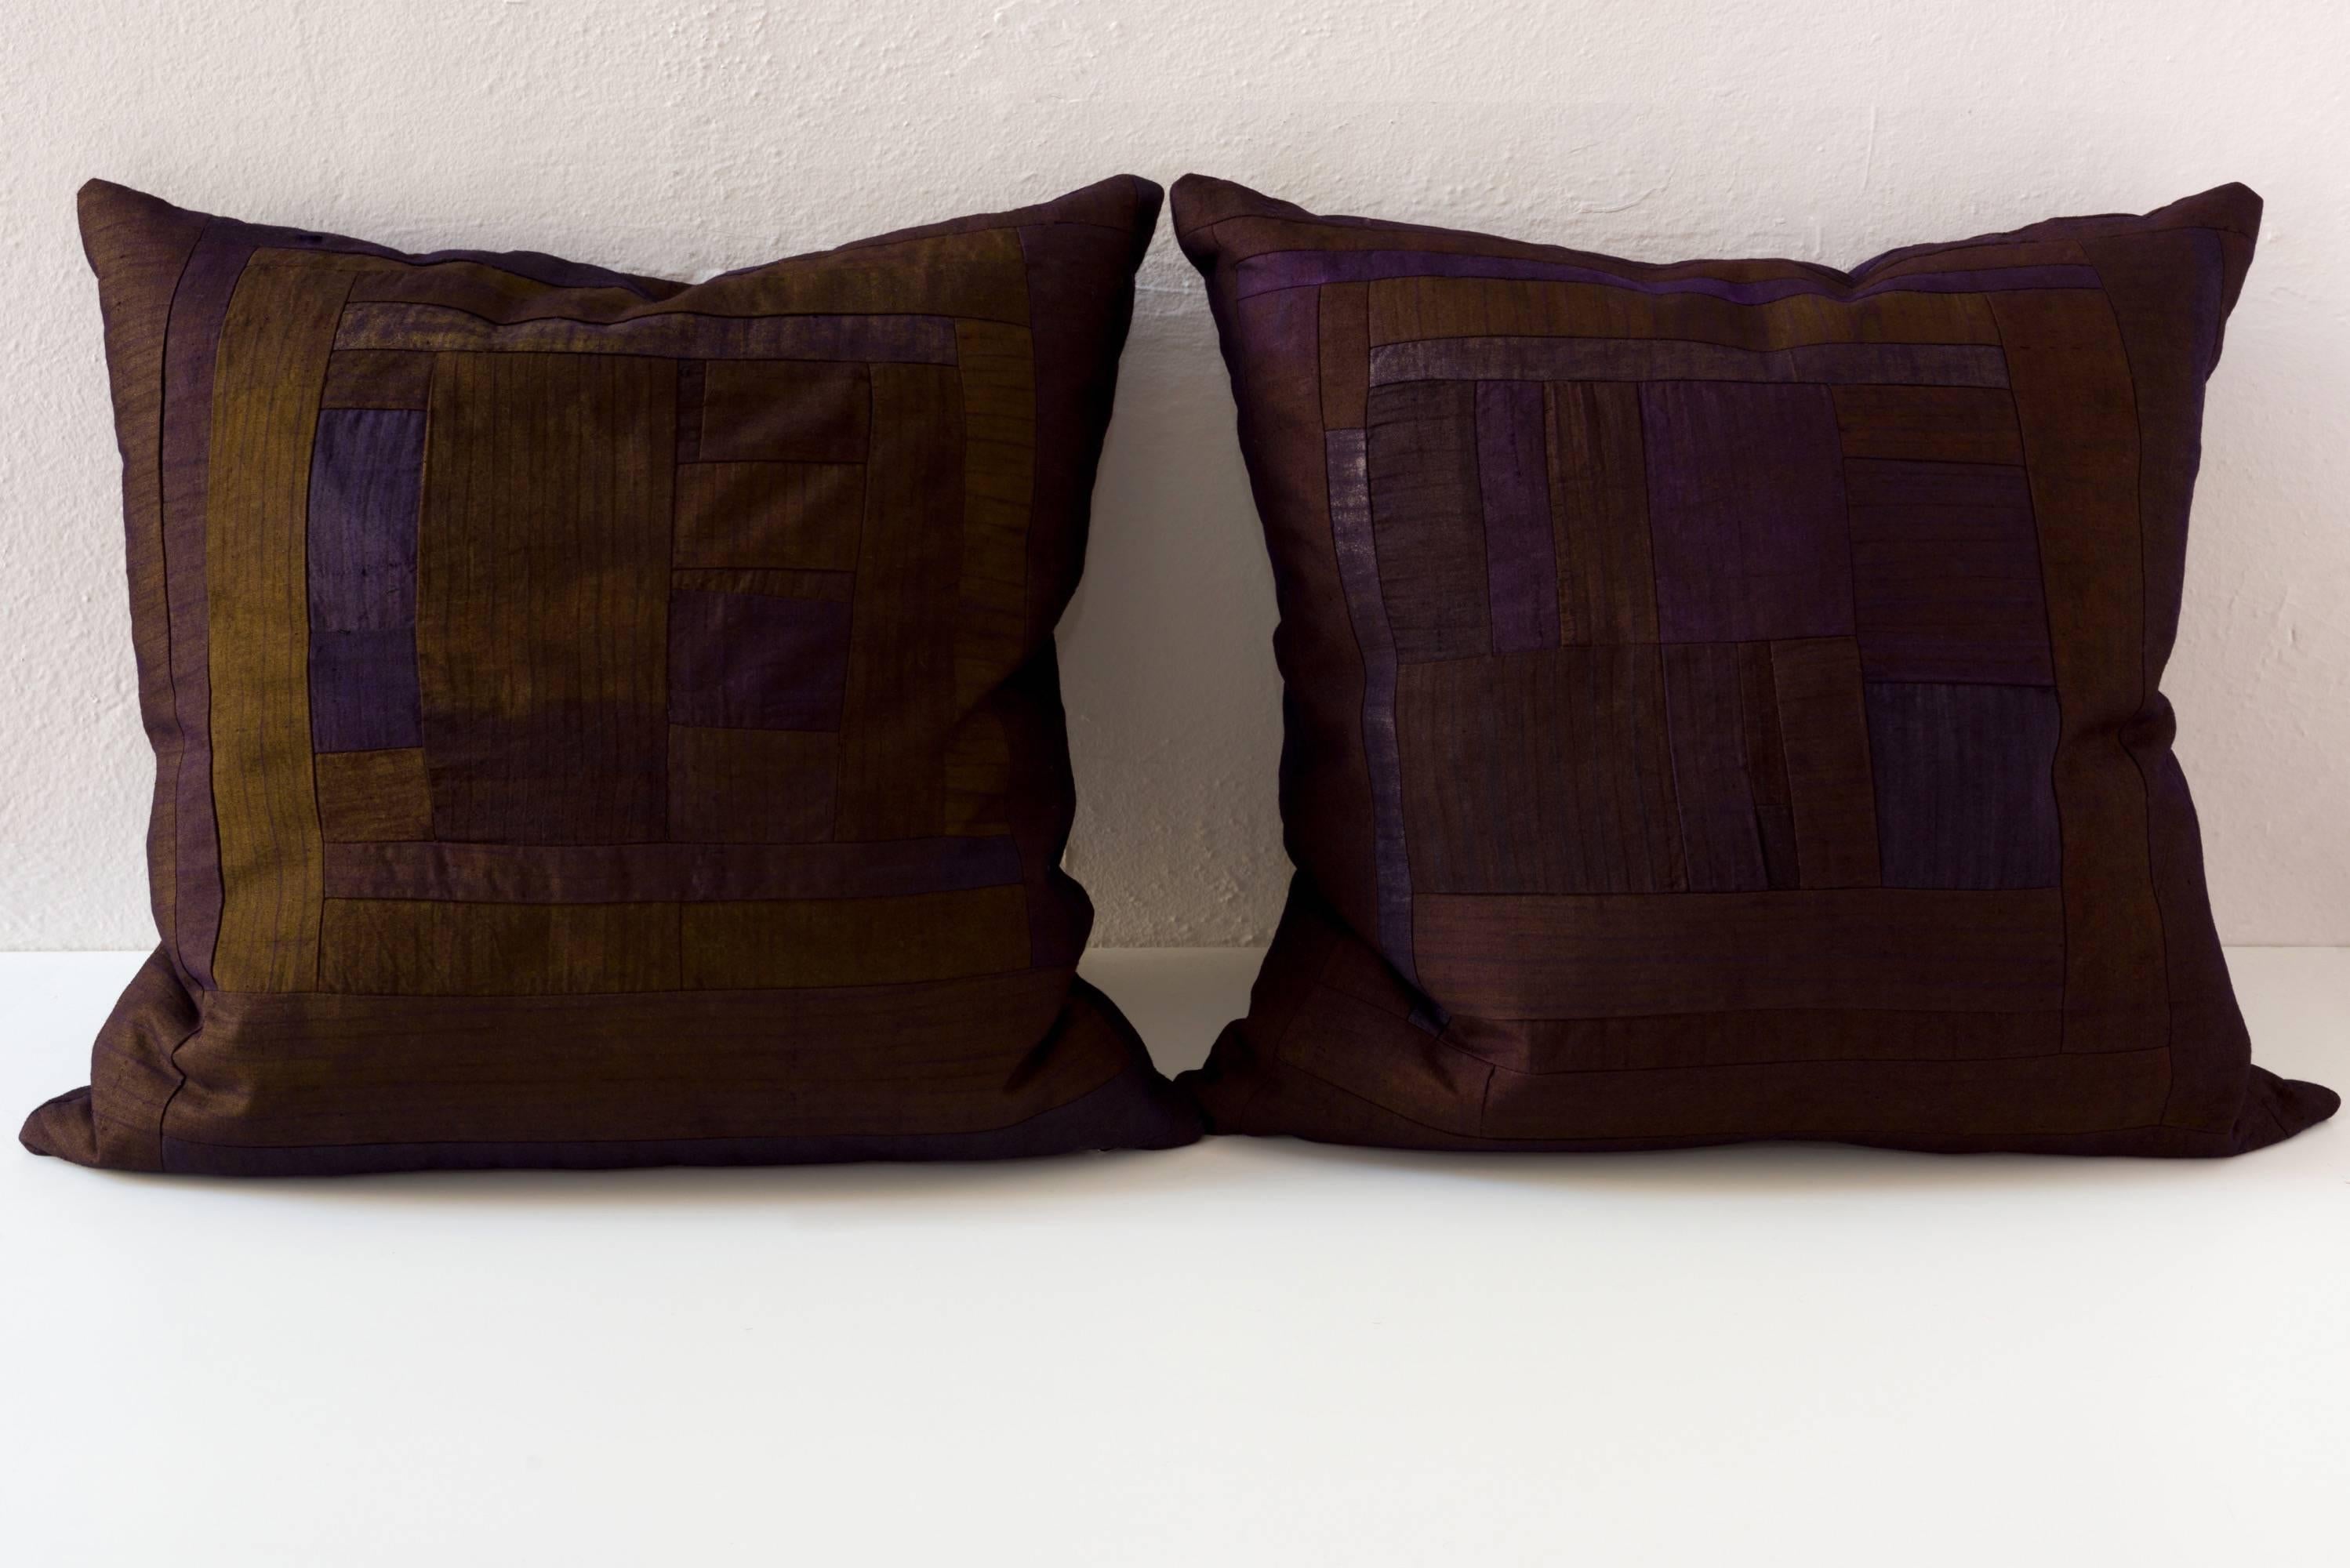 Hand-Woven Miao Piecework Pillows, Color-Block in Brown and Bronze For Sale